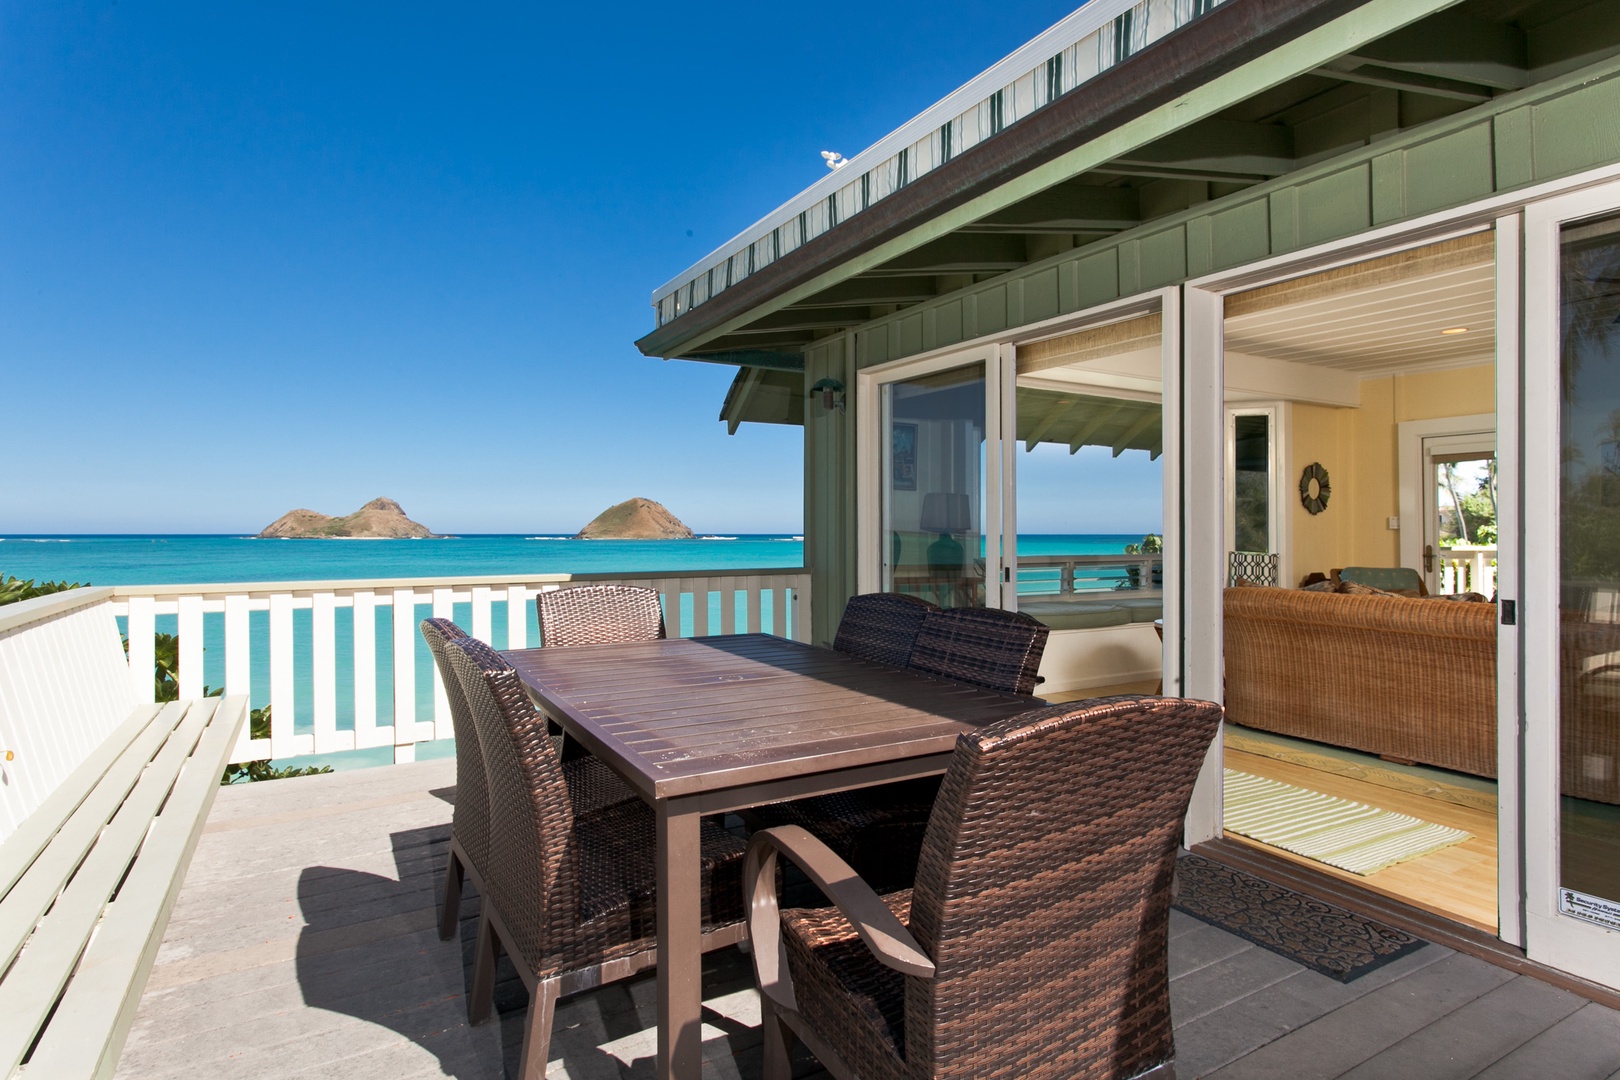 Kailua Vacation Rentals, Lanikai Village* - Welcome to Hale Kainalu, your island home by the beach.